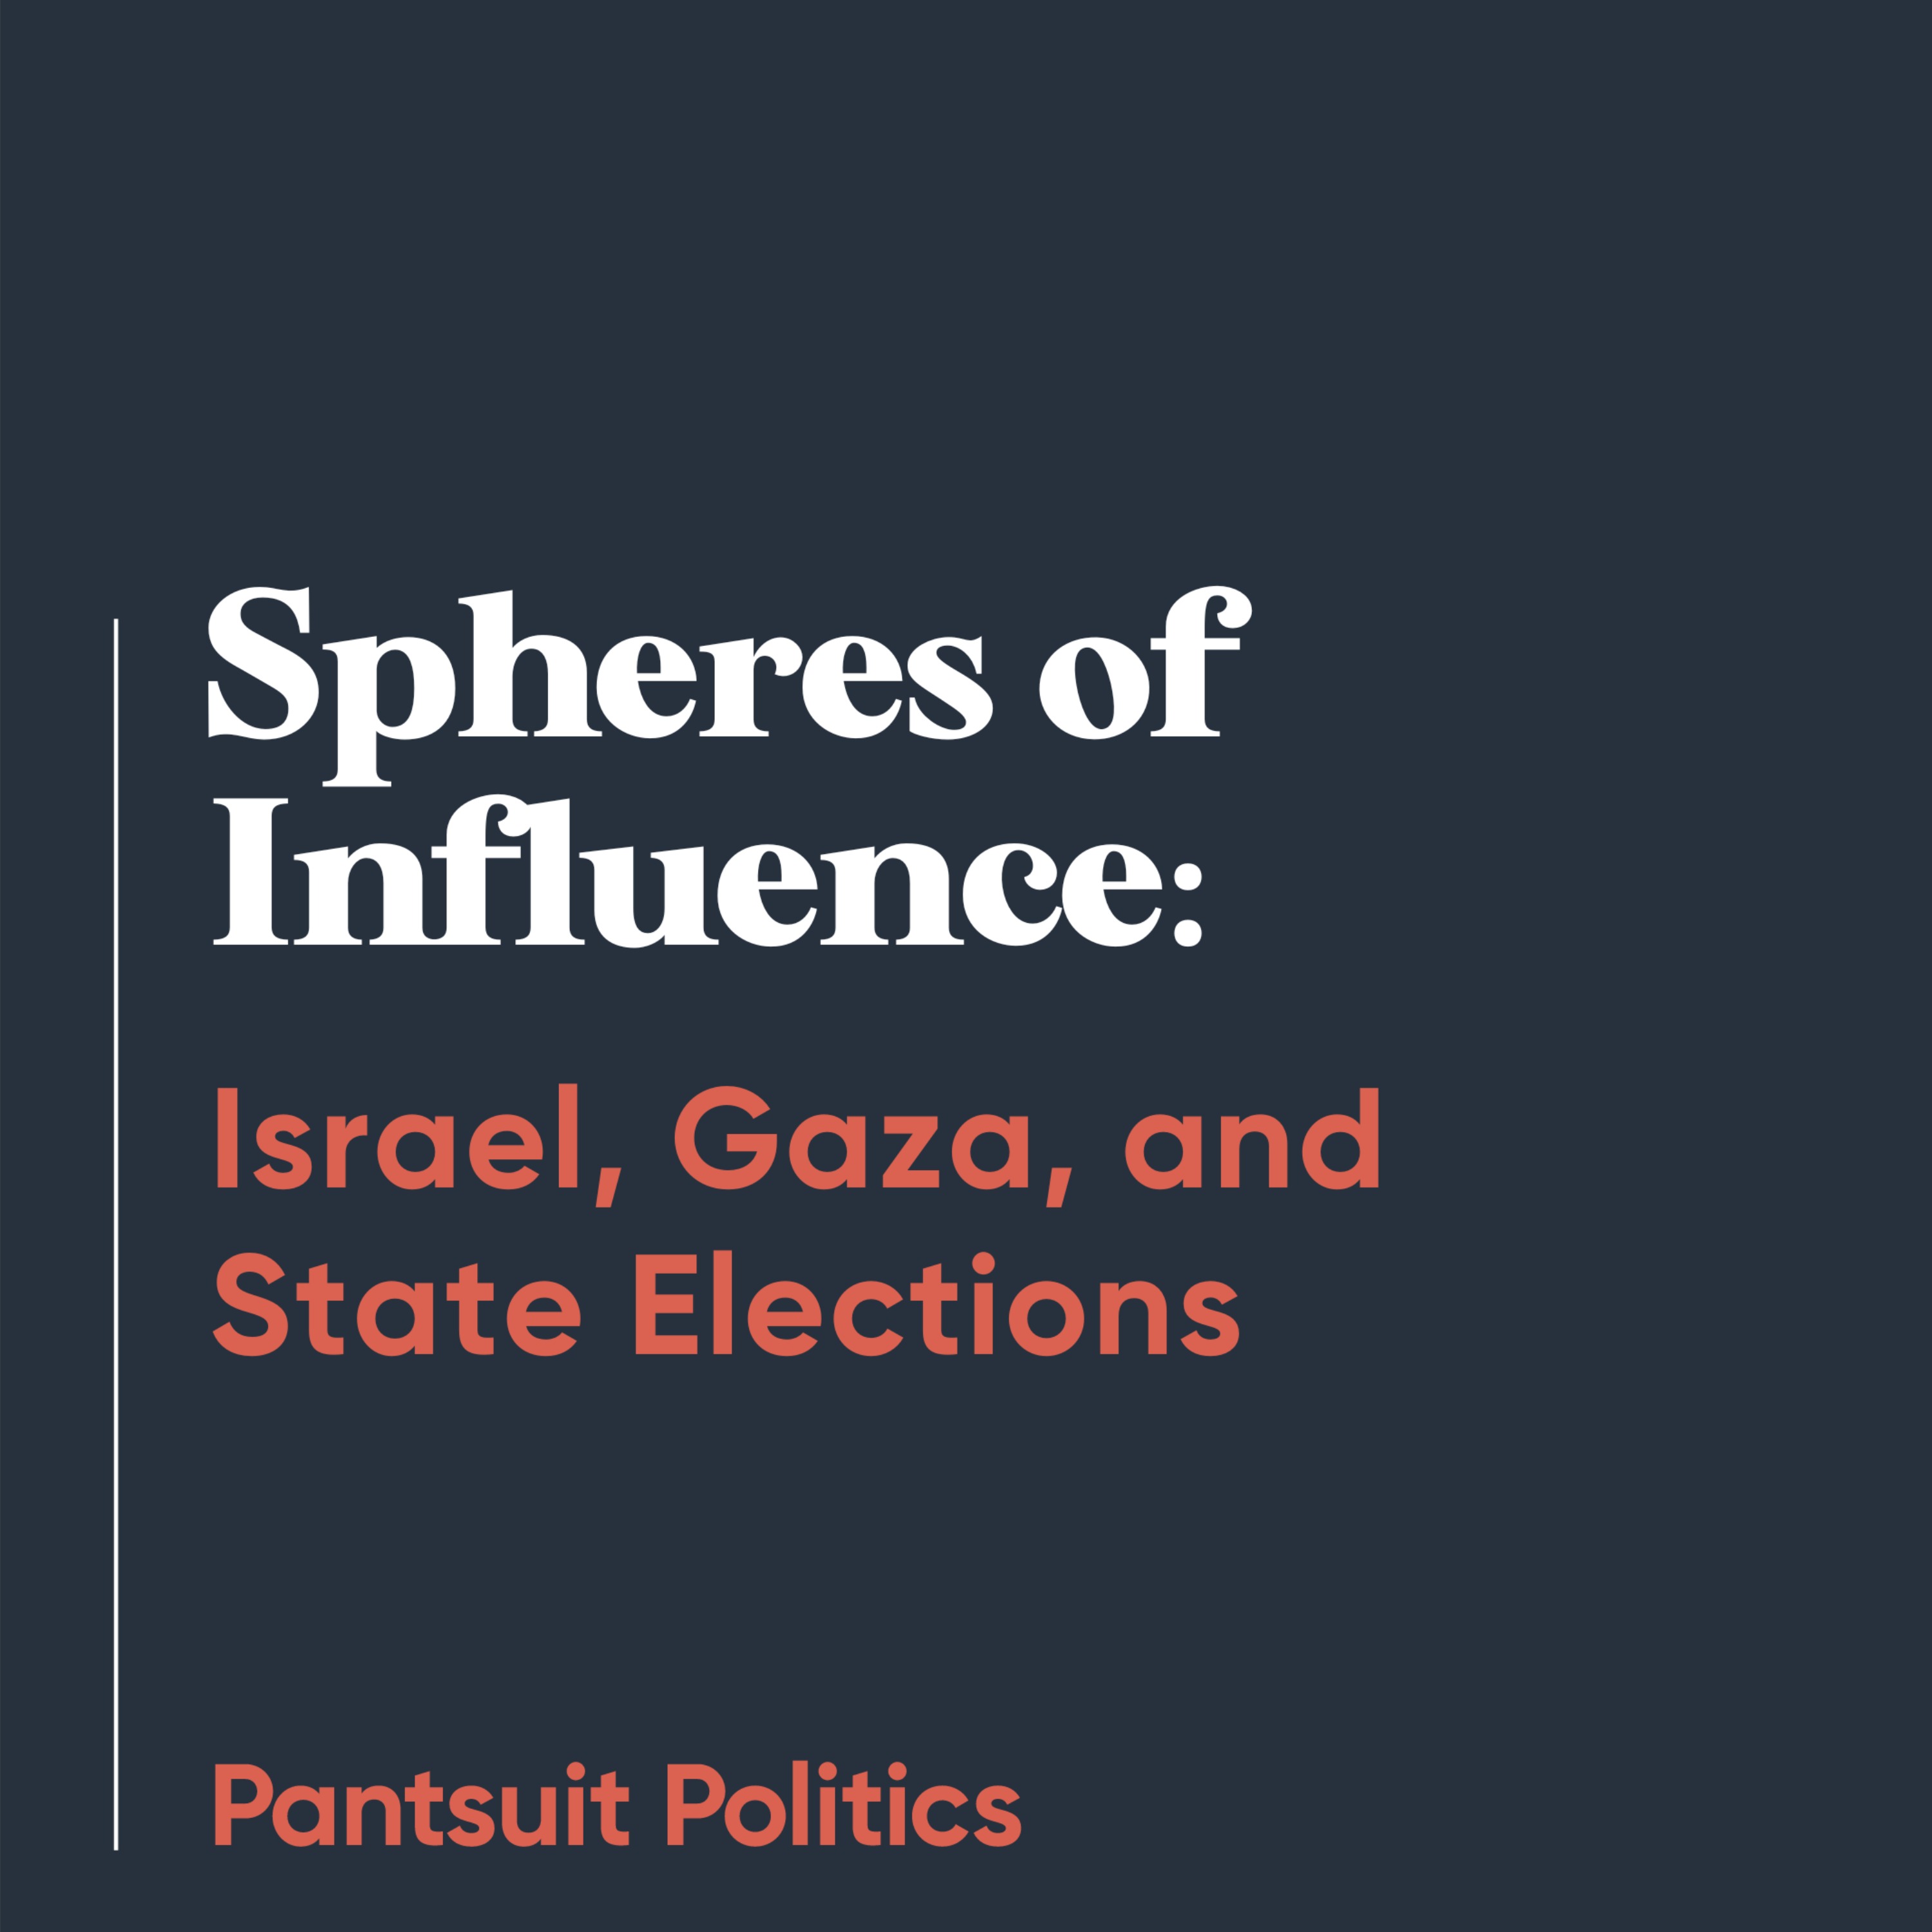 Spheres of Influence: Israel, Gaza, and State Elections